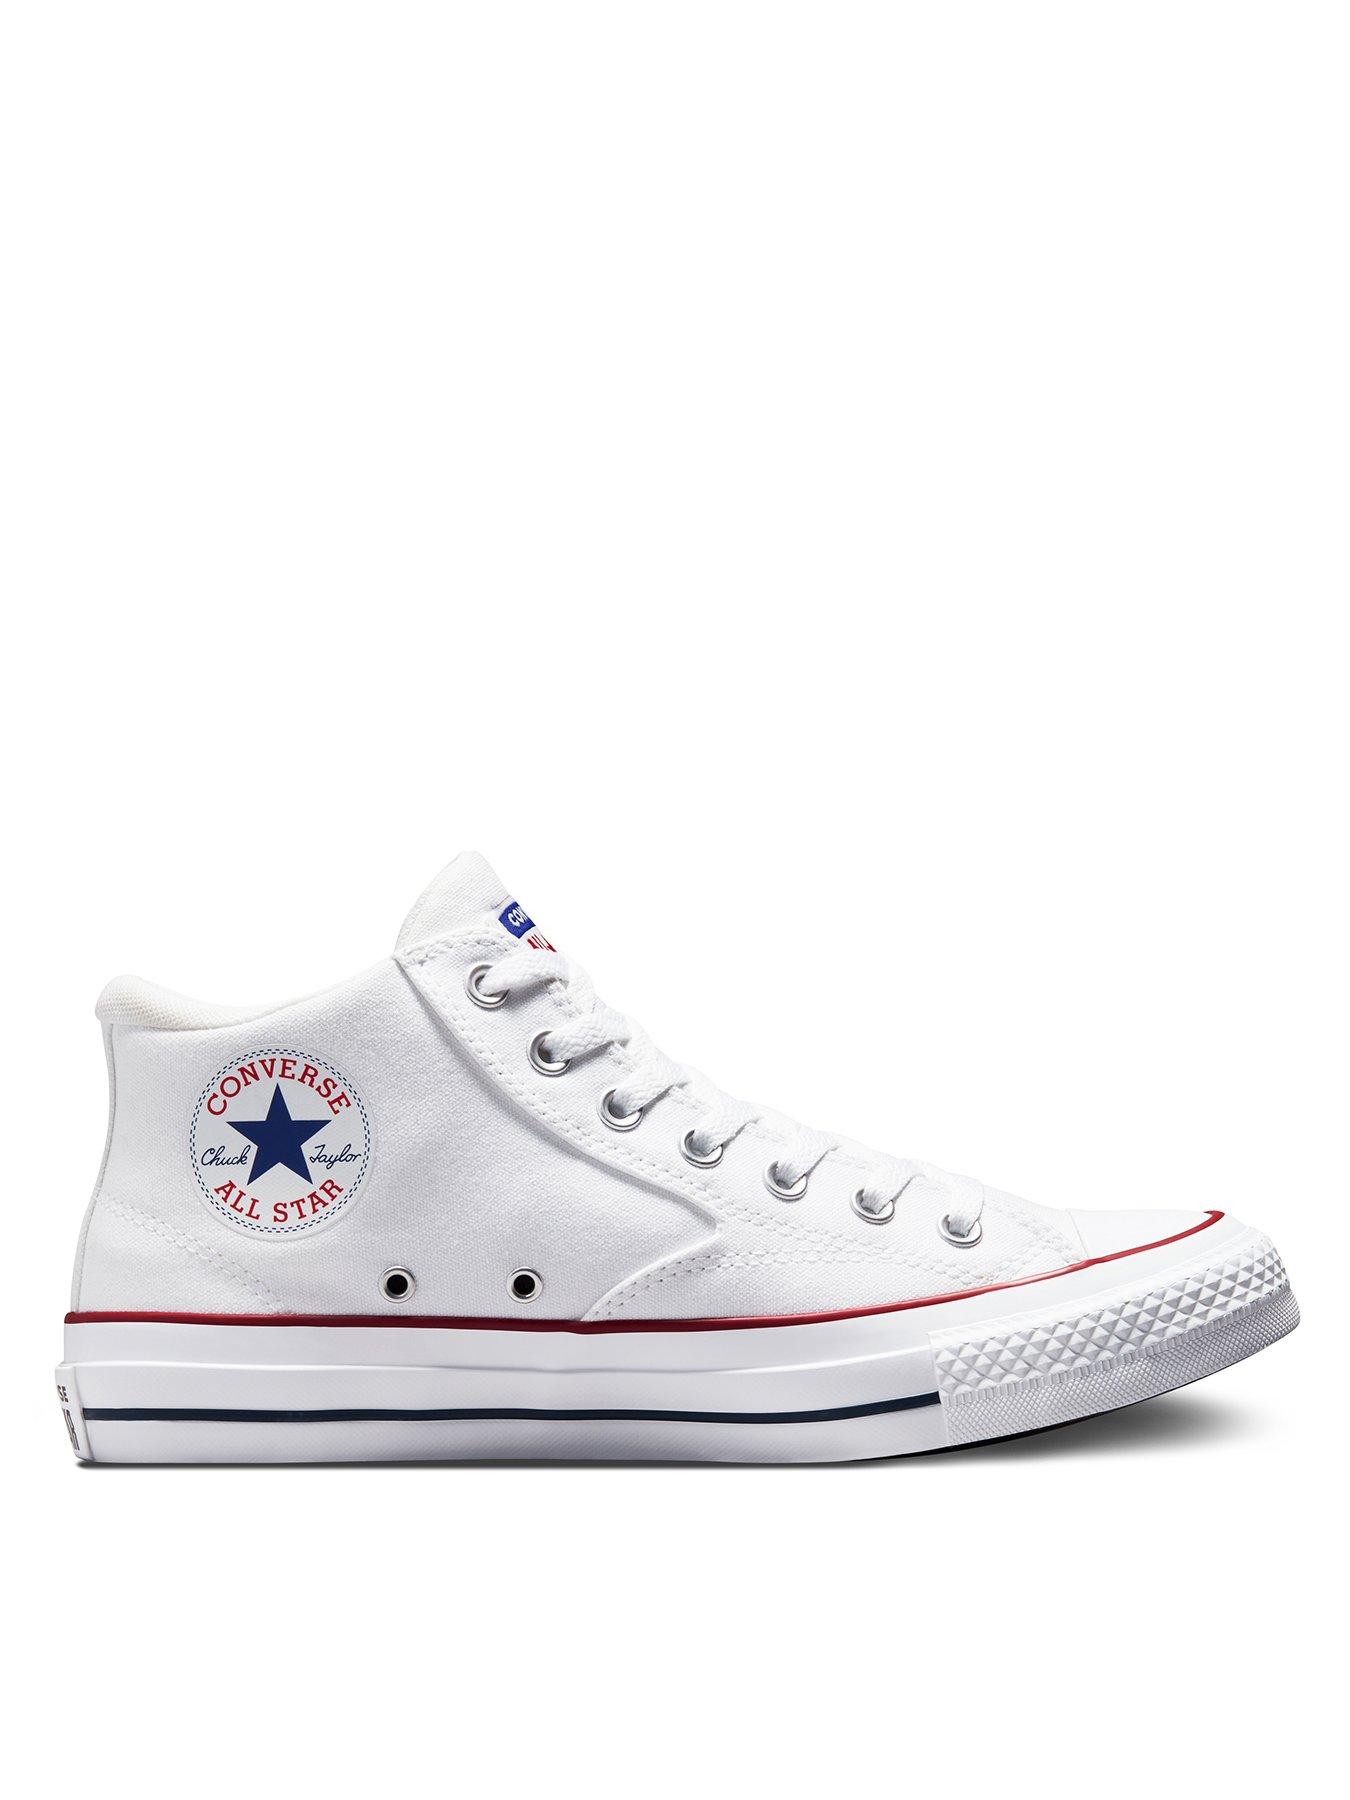 Converse All Star Hi Trainers In | escapeauthority.com